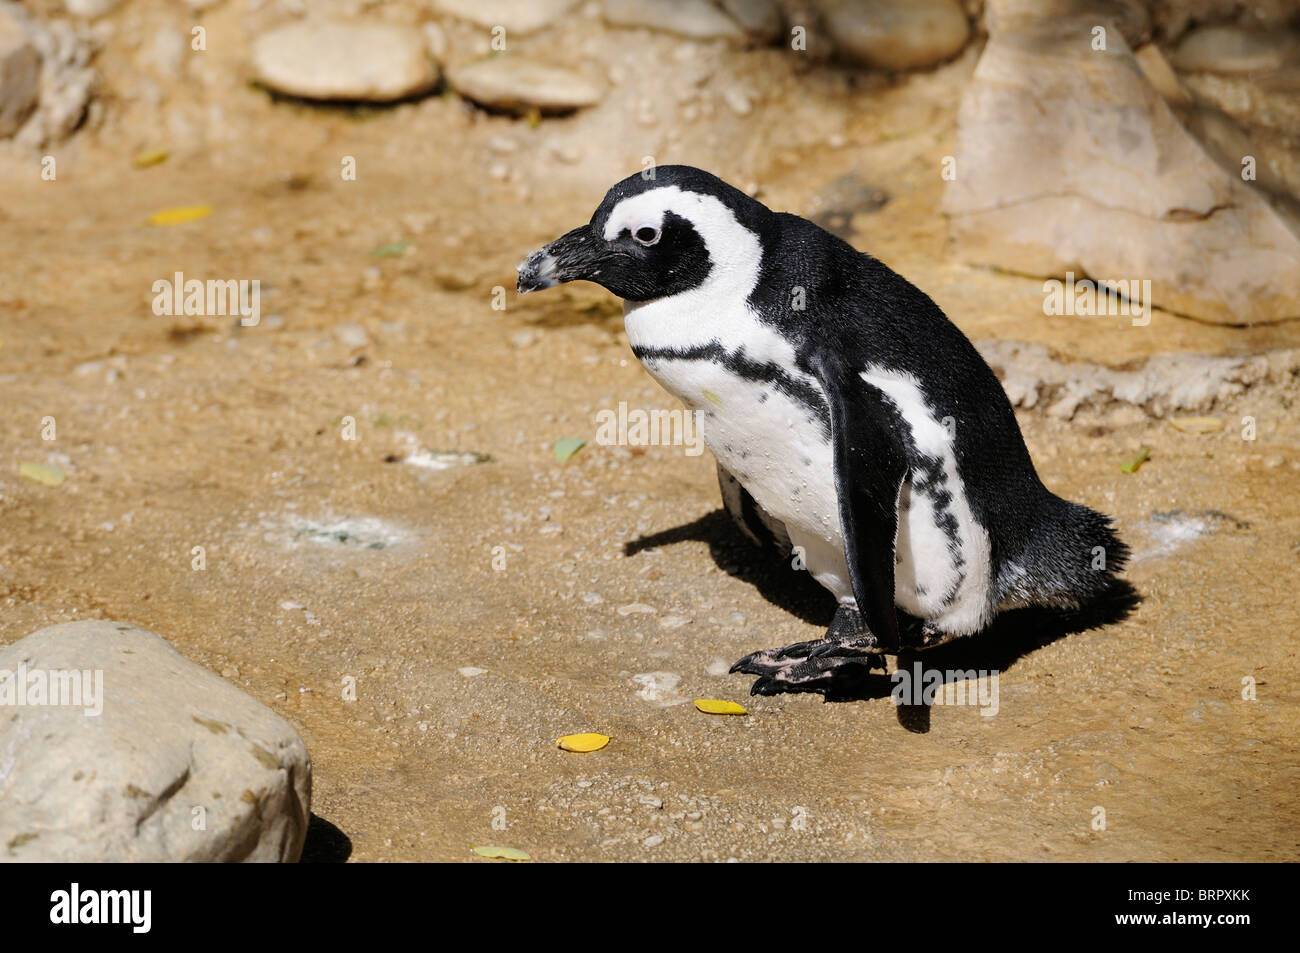 Stock photo of Penguins at La Palmyre Zoo in France. Stock Photo